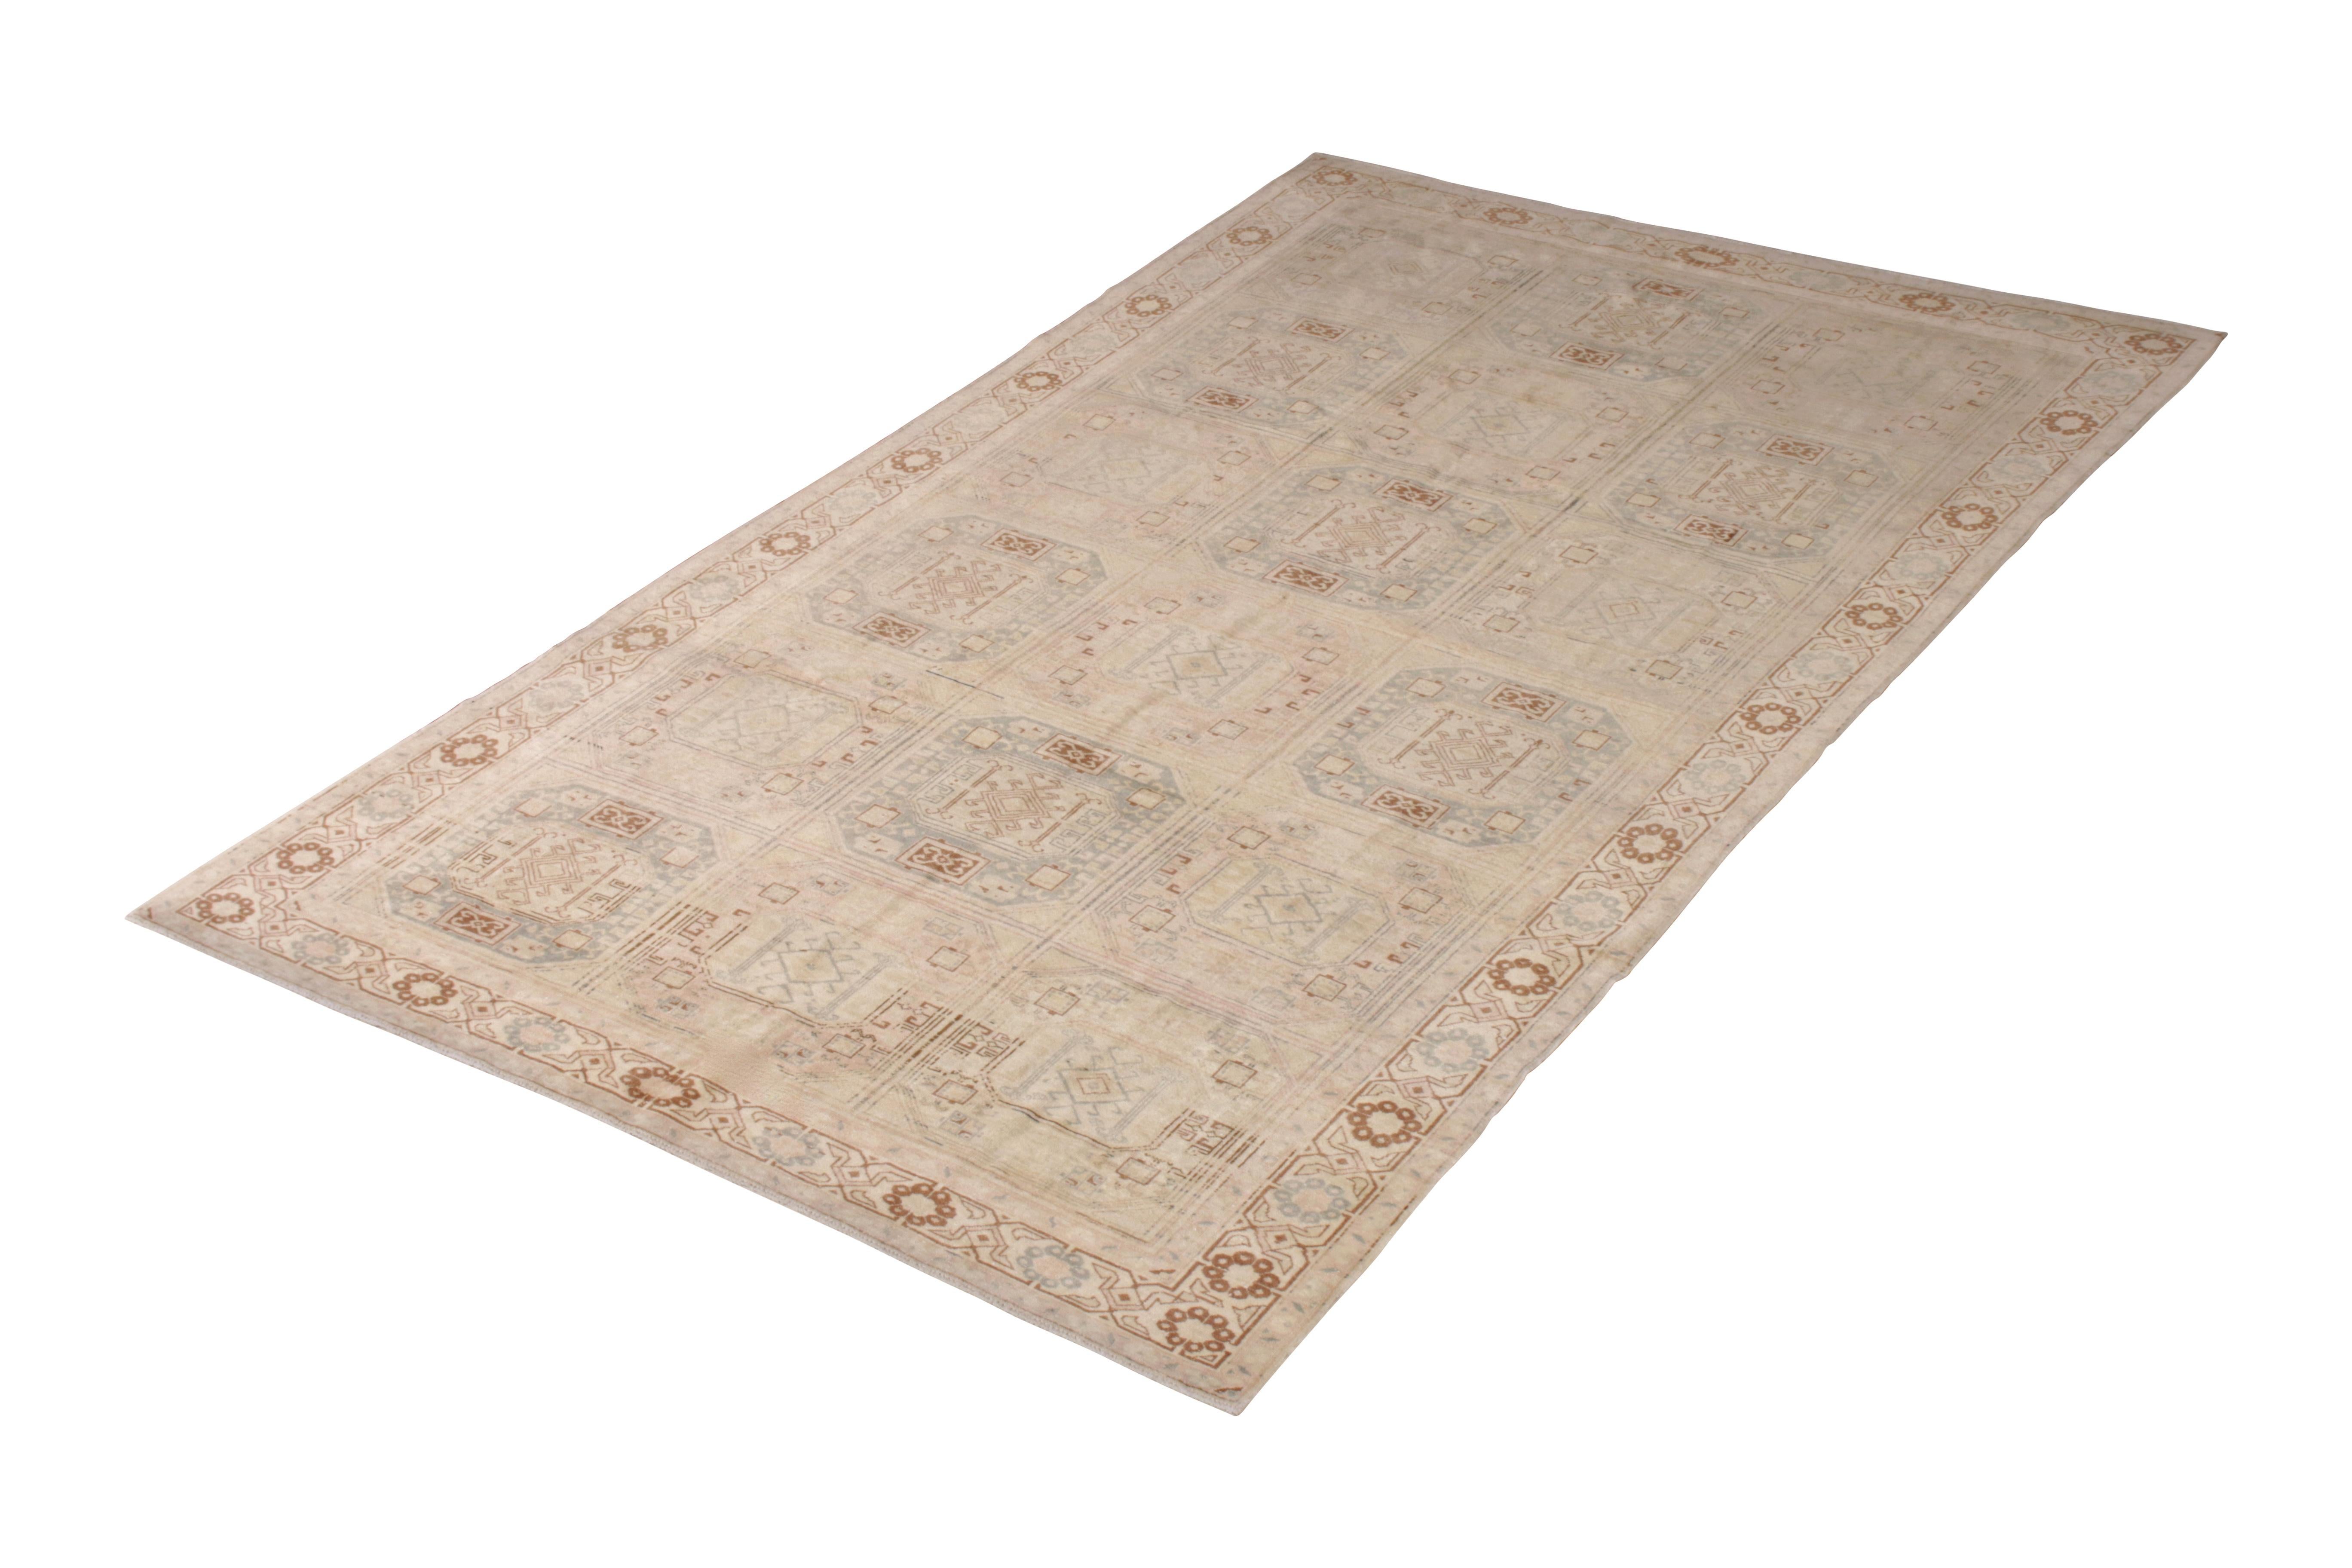 Handwoven in a wool flat-weave originating from Turkey circa 1950-1960, this vintage Kilim rug connotes a unique midcentury Kilim design of the period and region, embracing classic gul motifs in a unique play of subtle pink and blue alternations